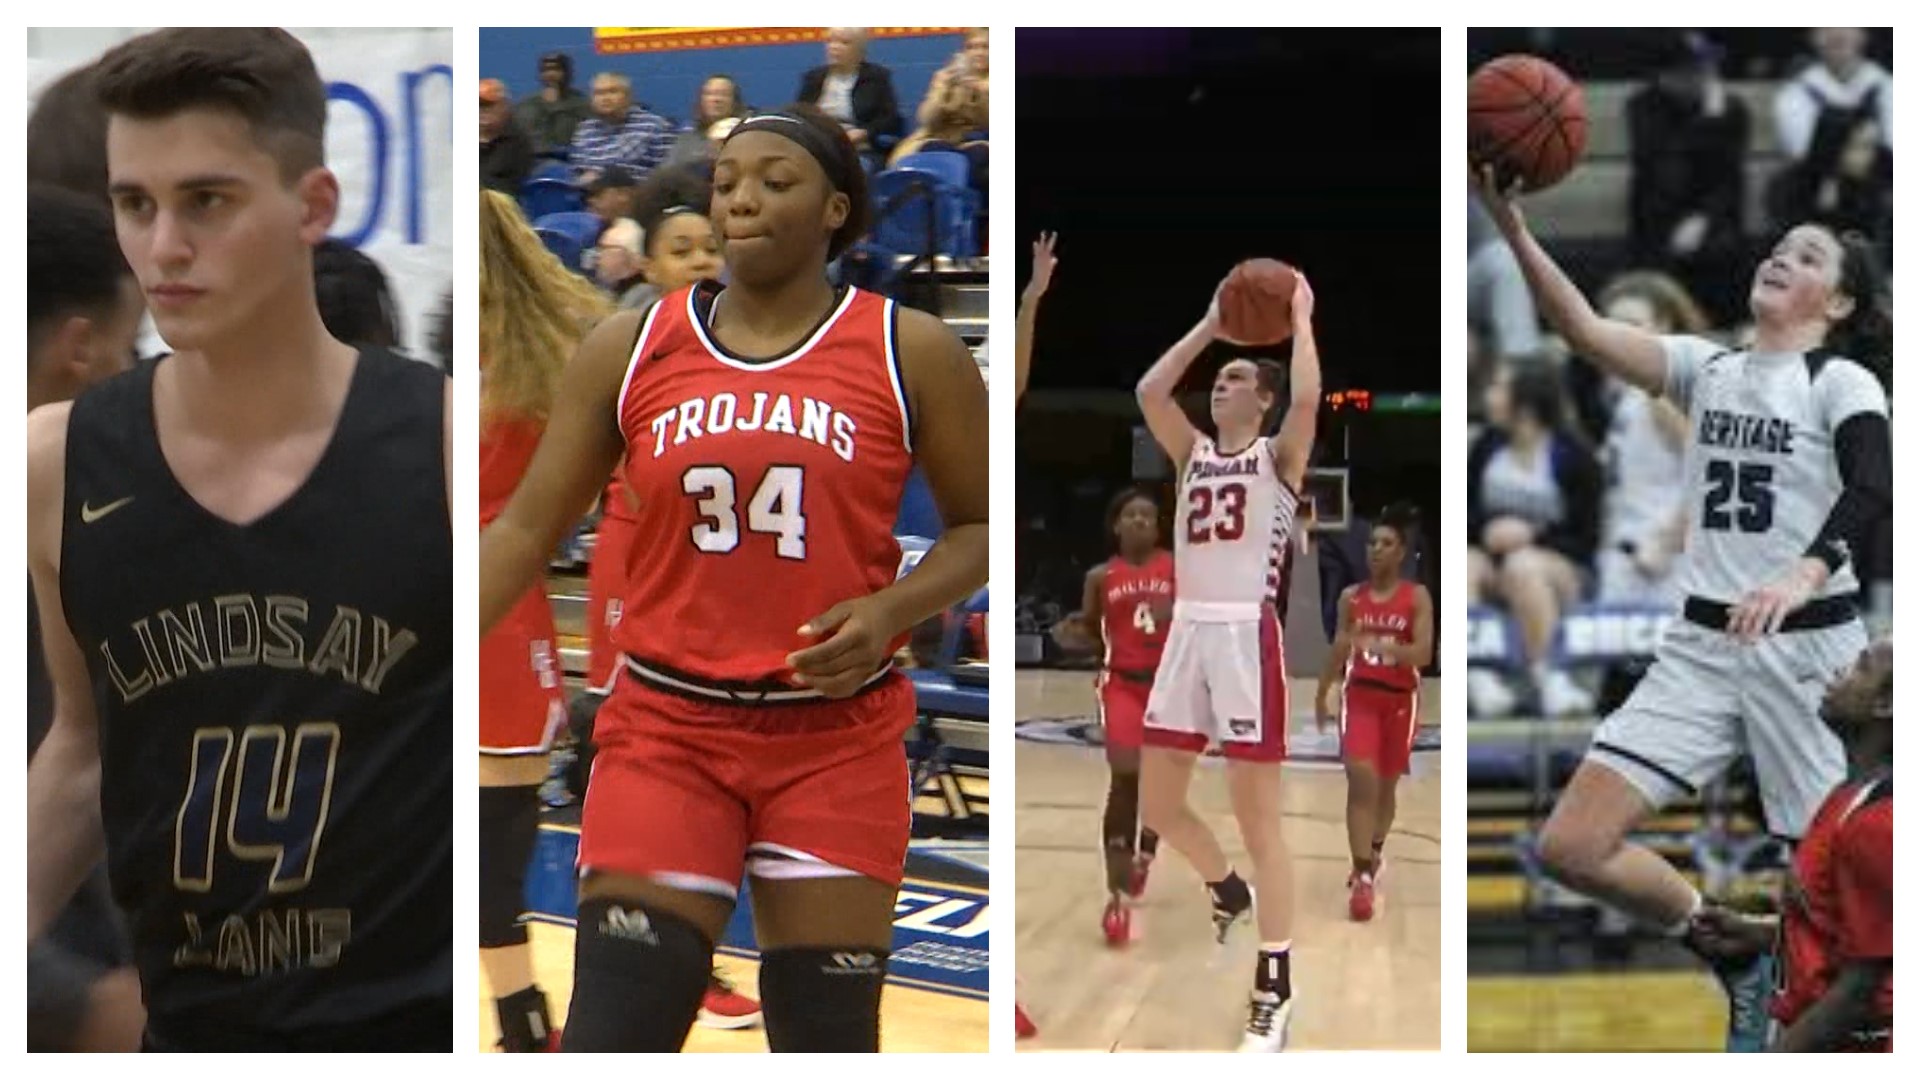 Four basketball players from the Tennessee Valley were named "Players of the Year" by the ASWA.